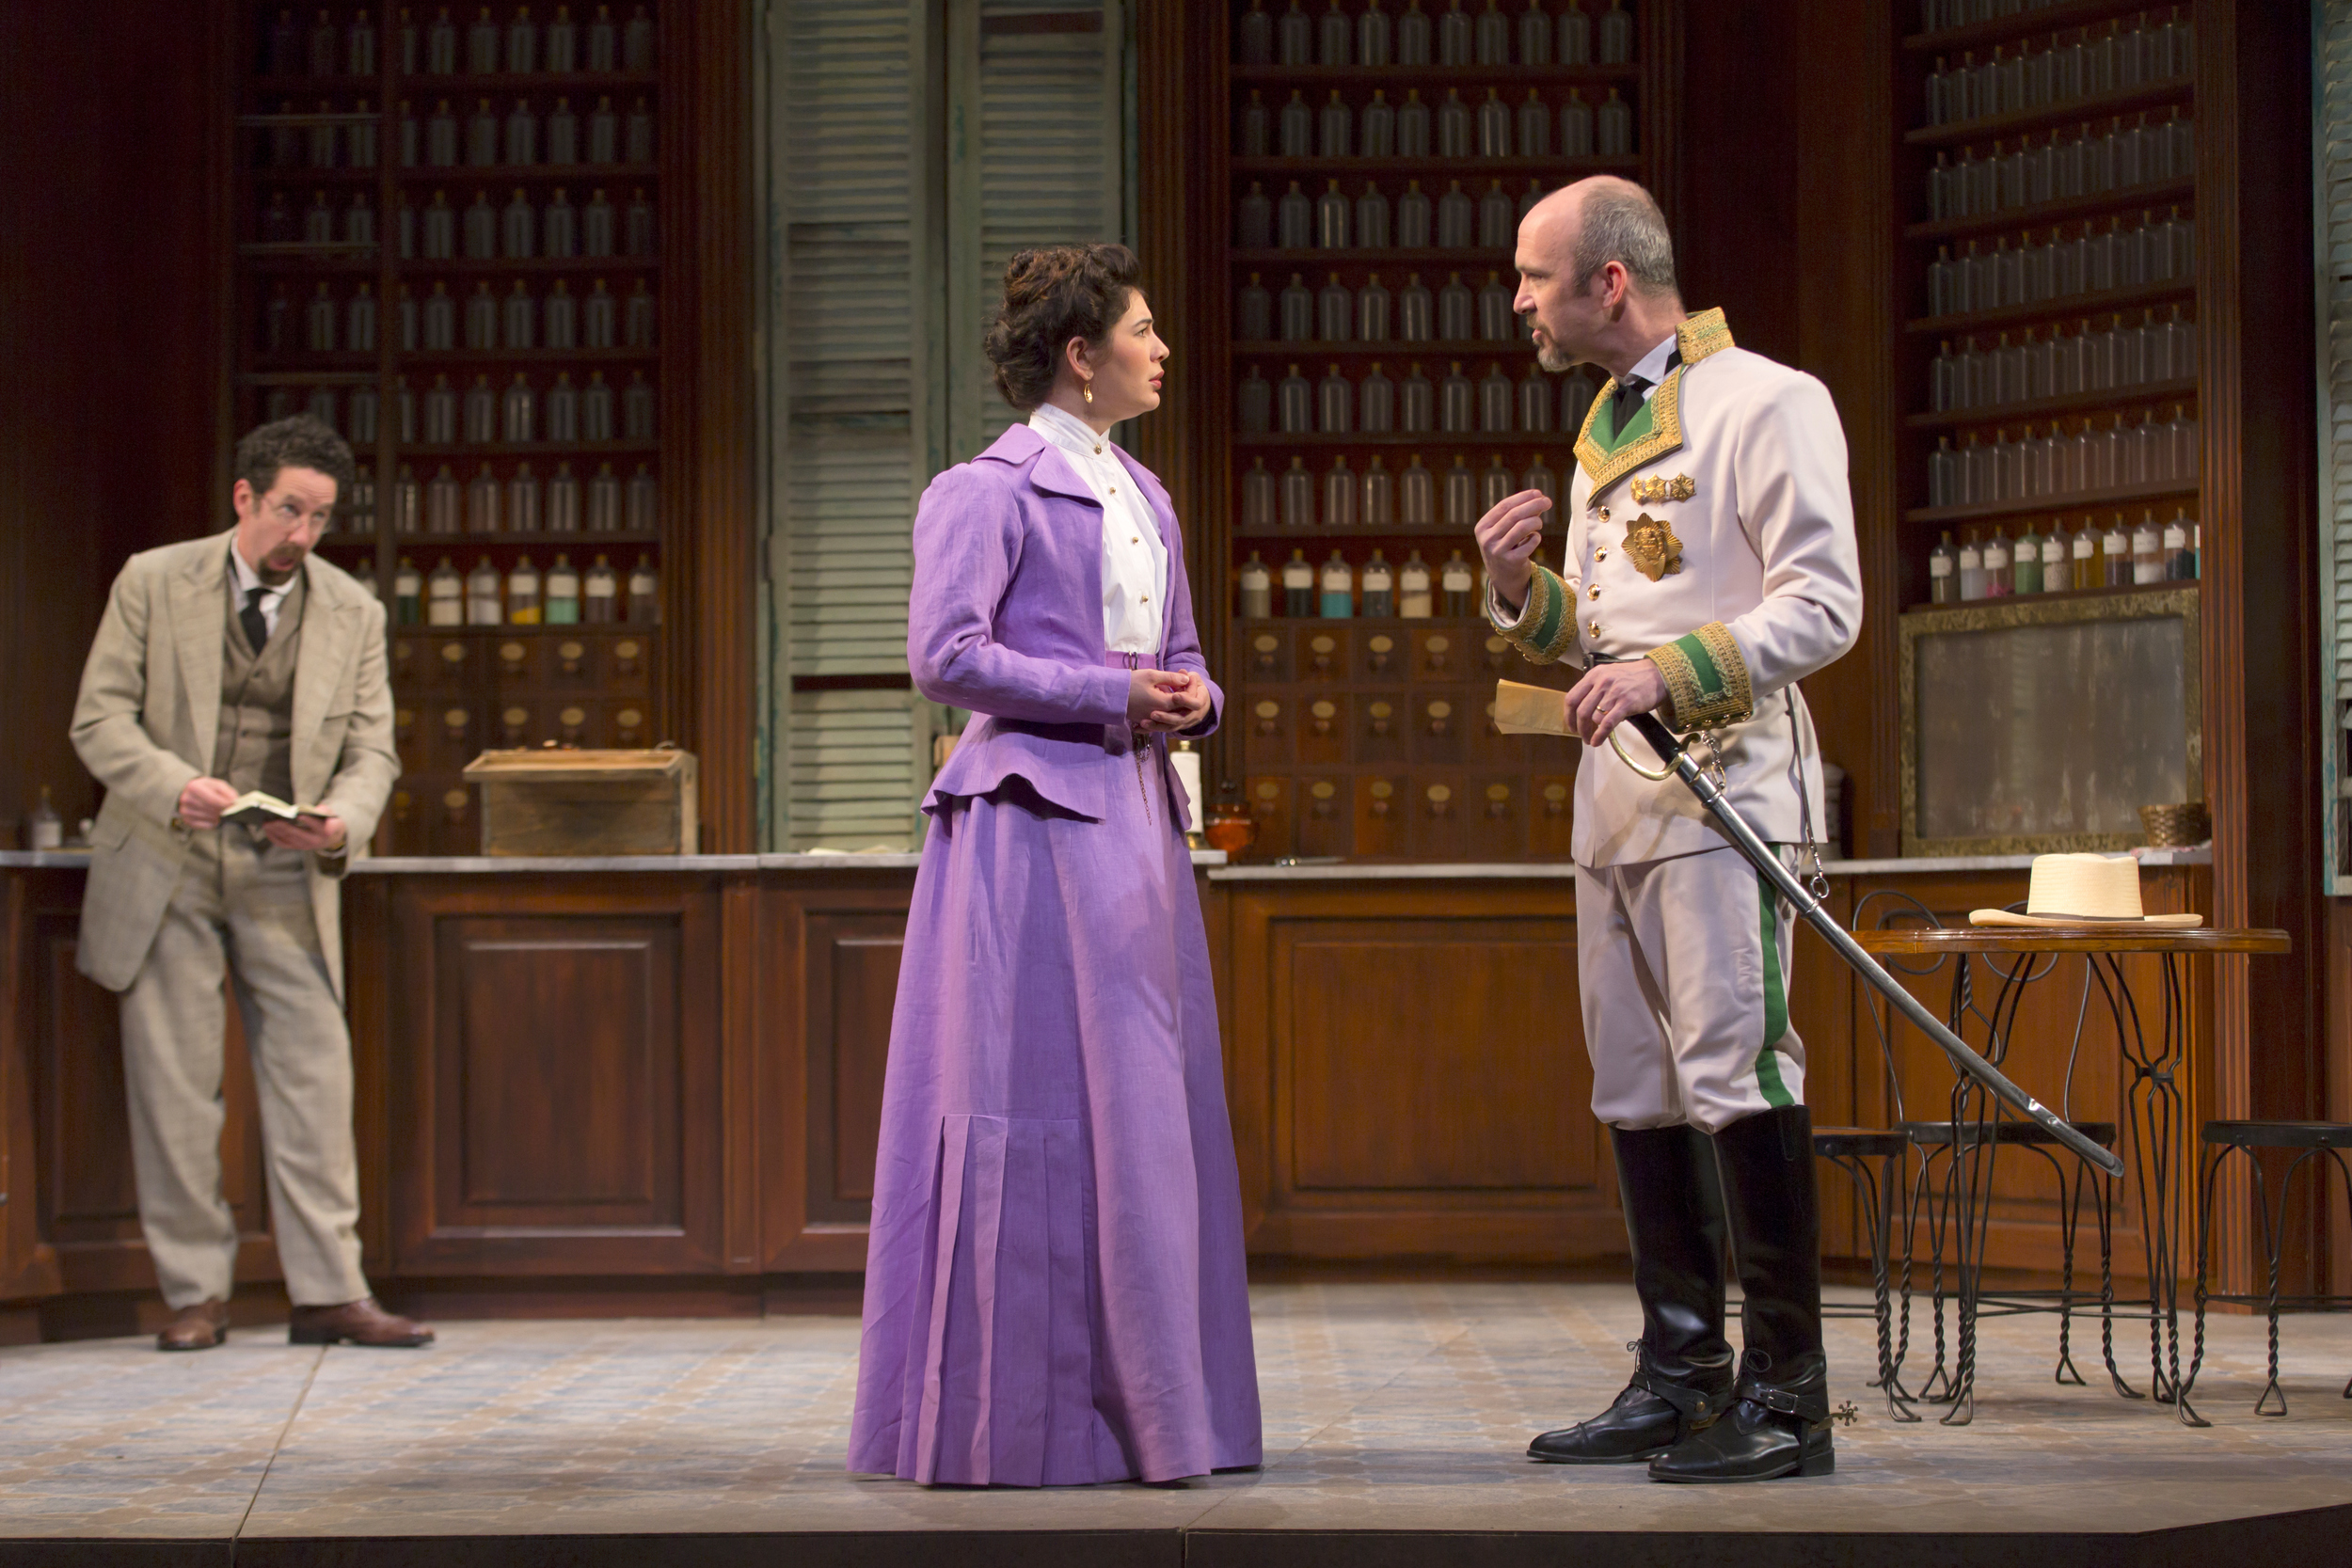  Christopher Tarjan, Christina Pumariega, and Christopher Burns in the Huntington Theatre Company's production of Melinda Lopez's BECOMING CUBA.  March 28 - May 3, 2014 at South End / Calderwood Pavilion at the BCA. huntingtontheatre.org. Photo T. Ch